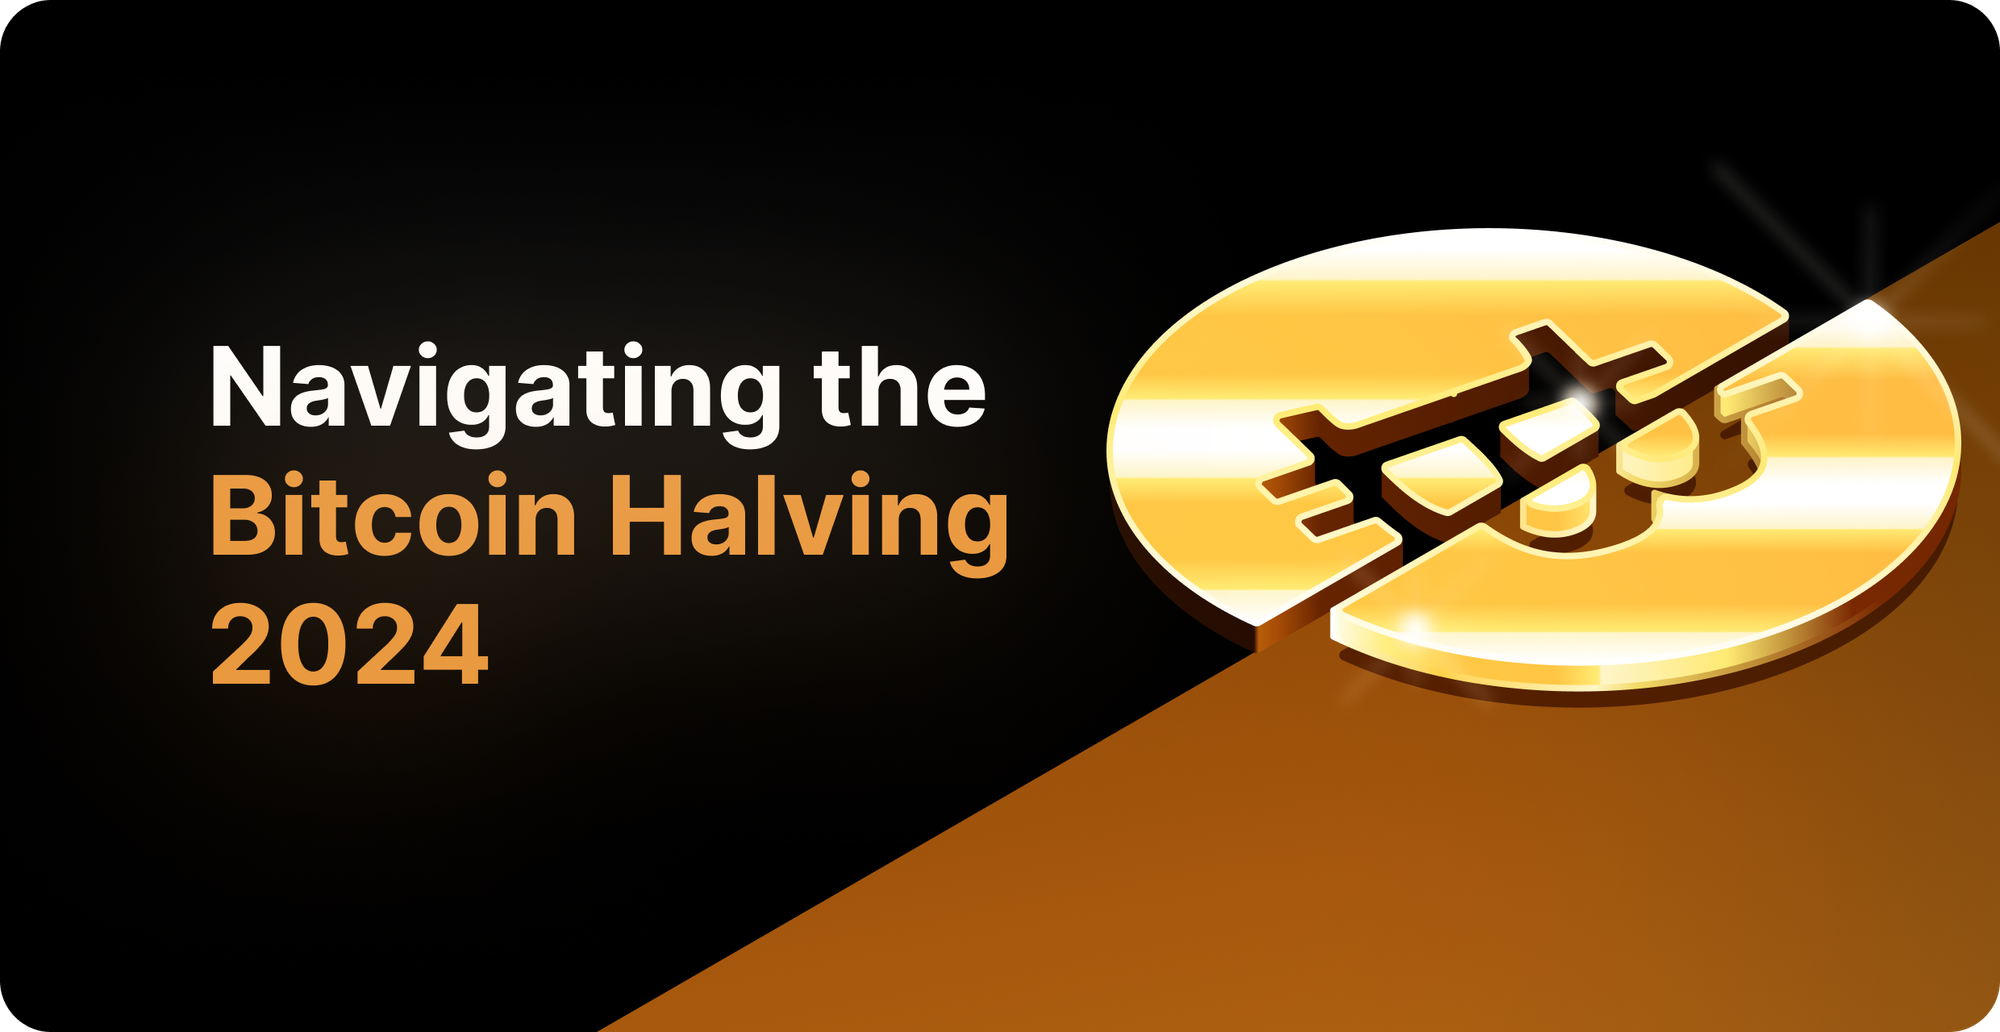 A Quick Guide to the 2024 Bitcoin Halving